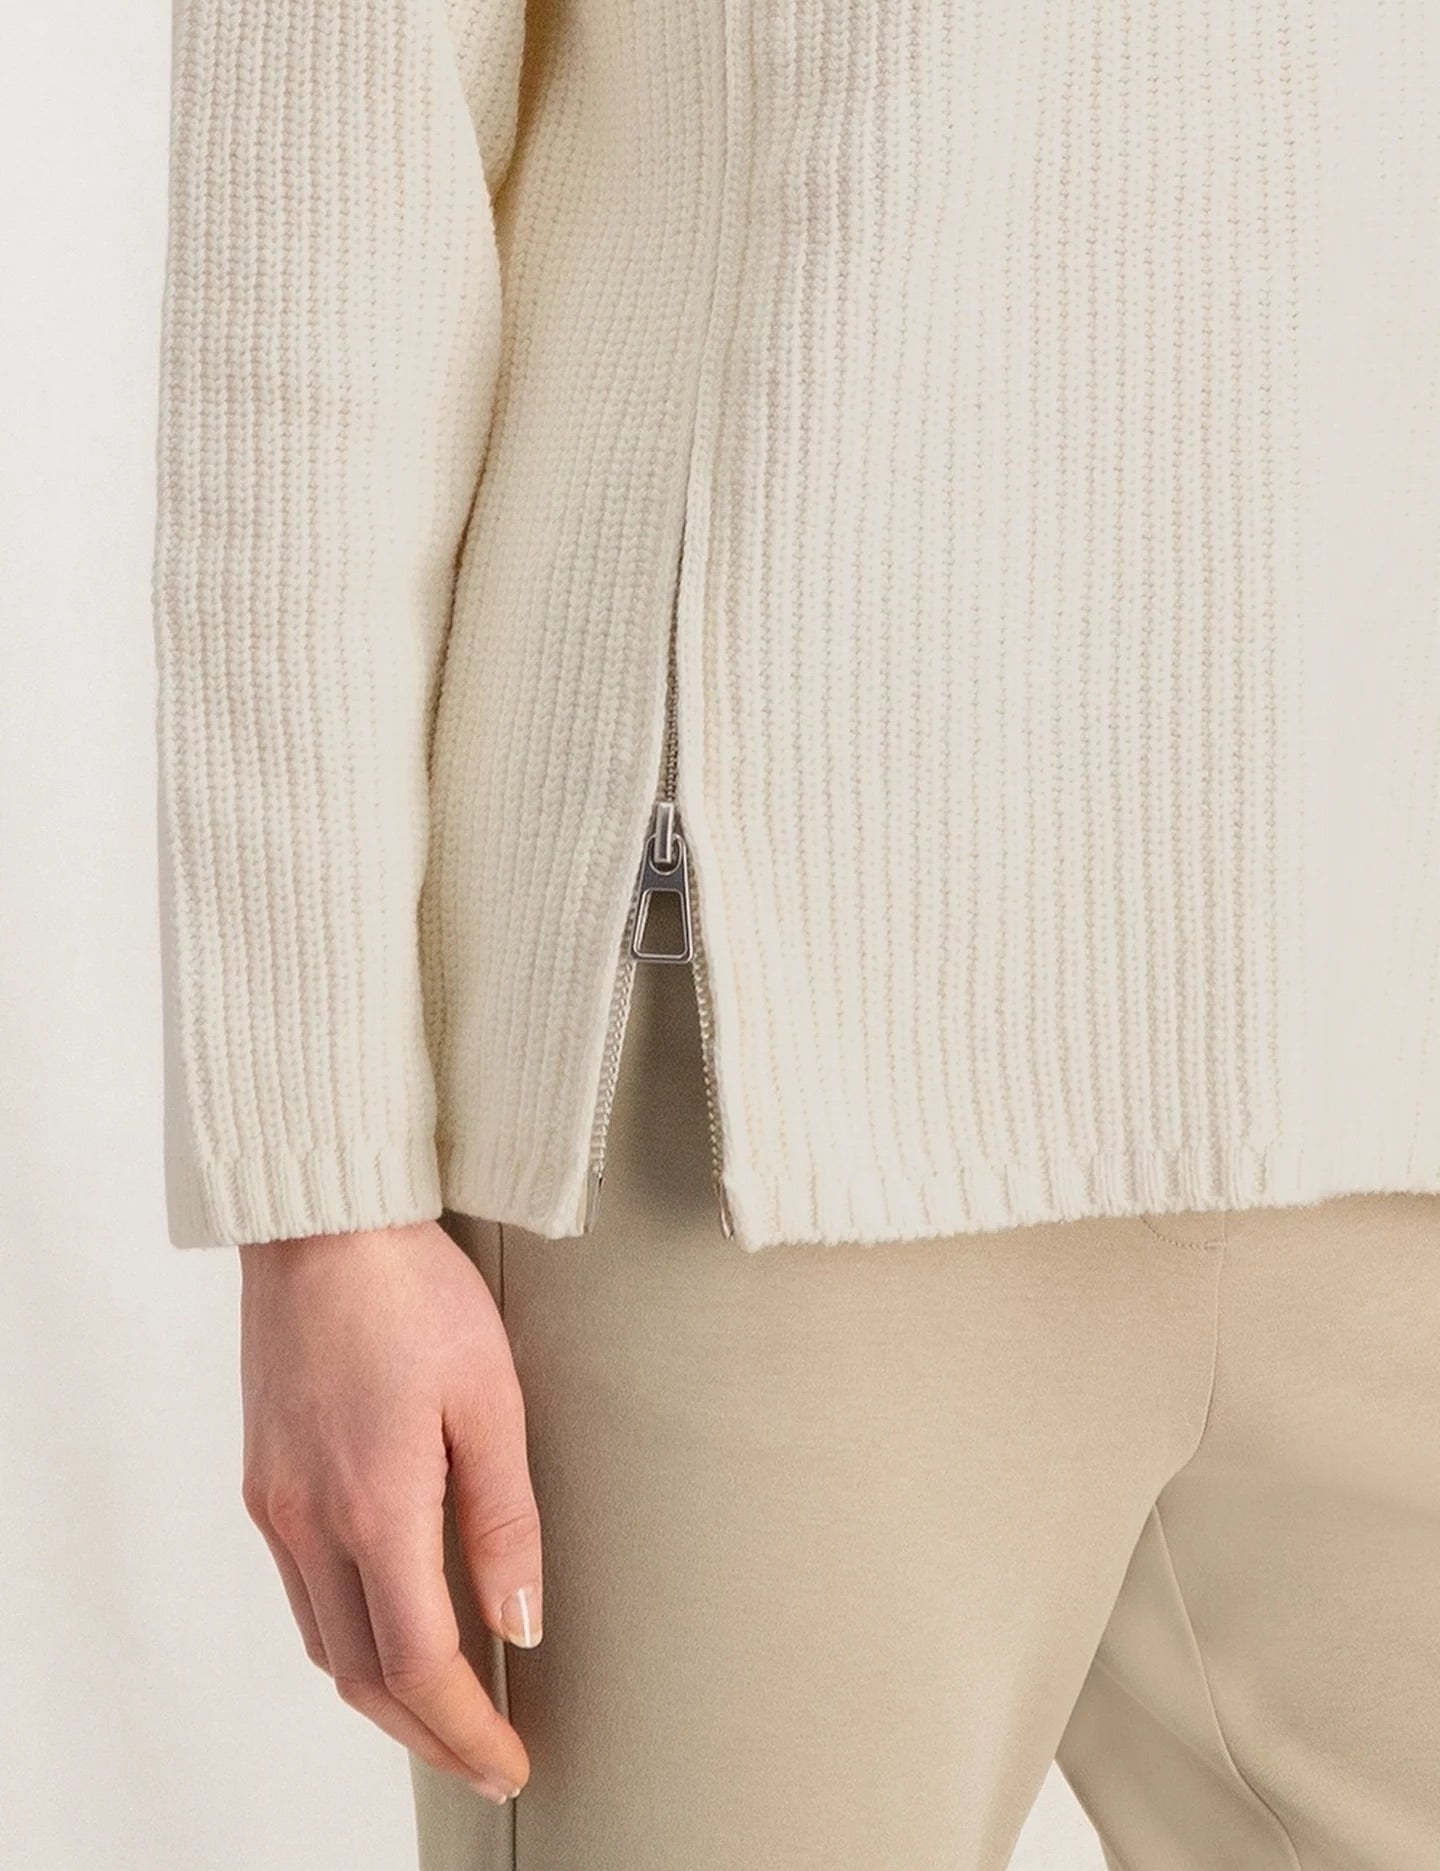 ribbed-sweater-with-turtleneck-long-sleeves-and-zip-off-white-knit_3beac796-9b84-43c4-b8bc-e266acfc5611_2880x_jpg.jpg